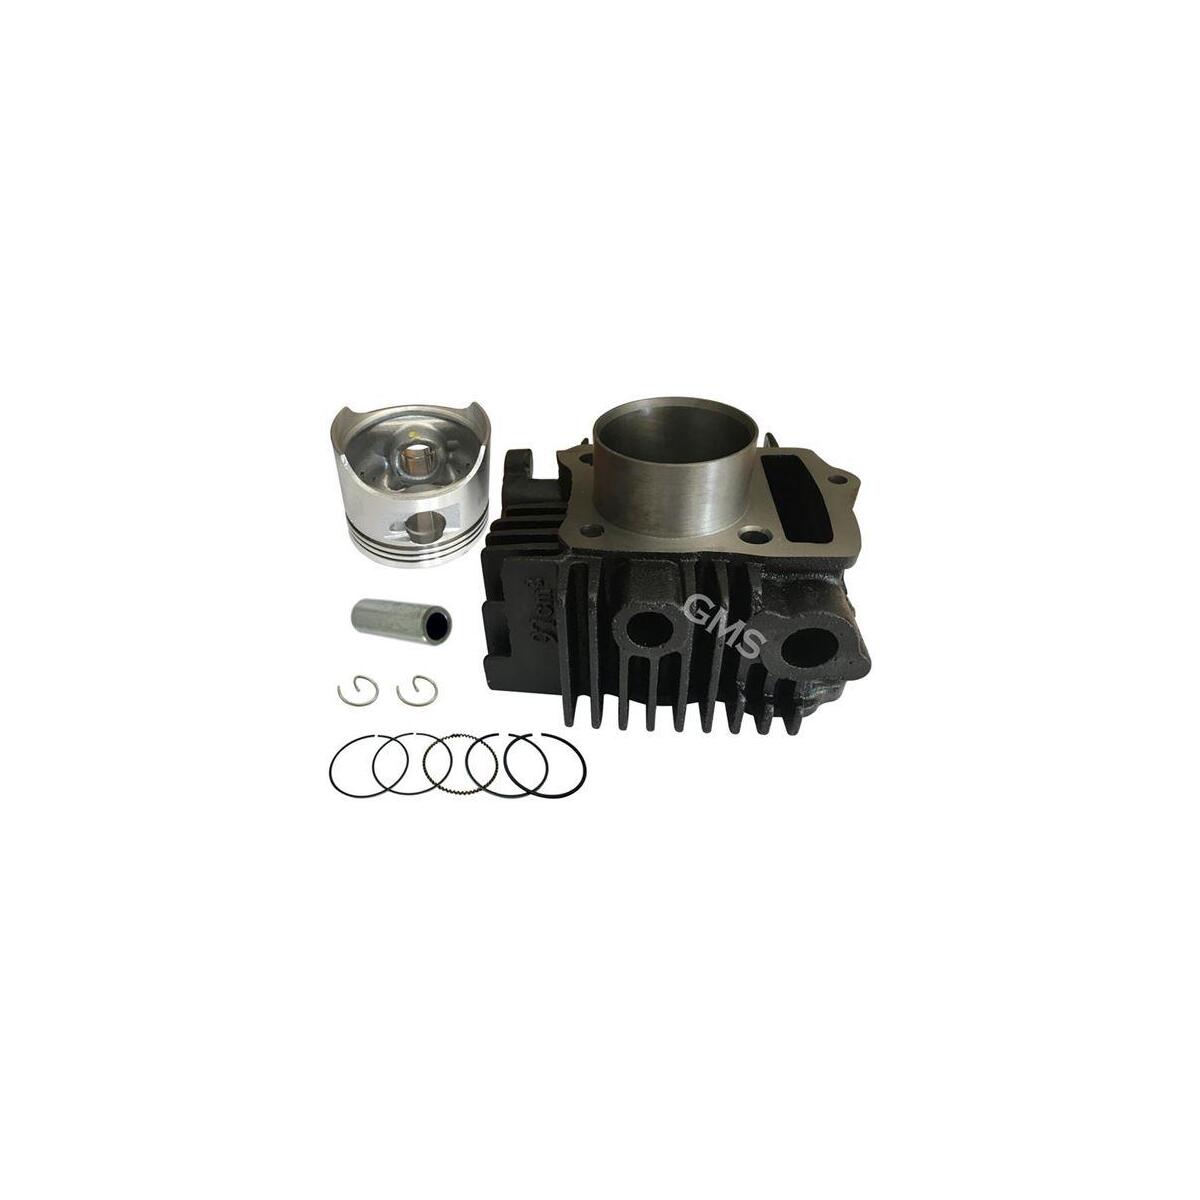 Cup Cup Silindir Set 52.40Mm 13P Lifan Cup110